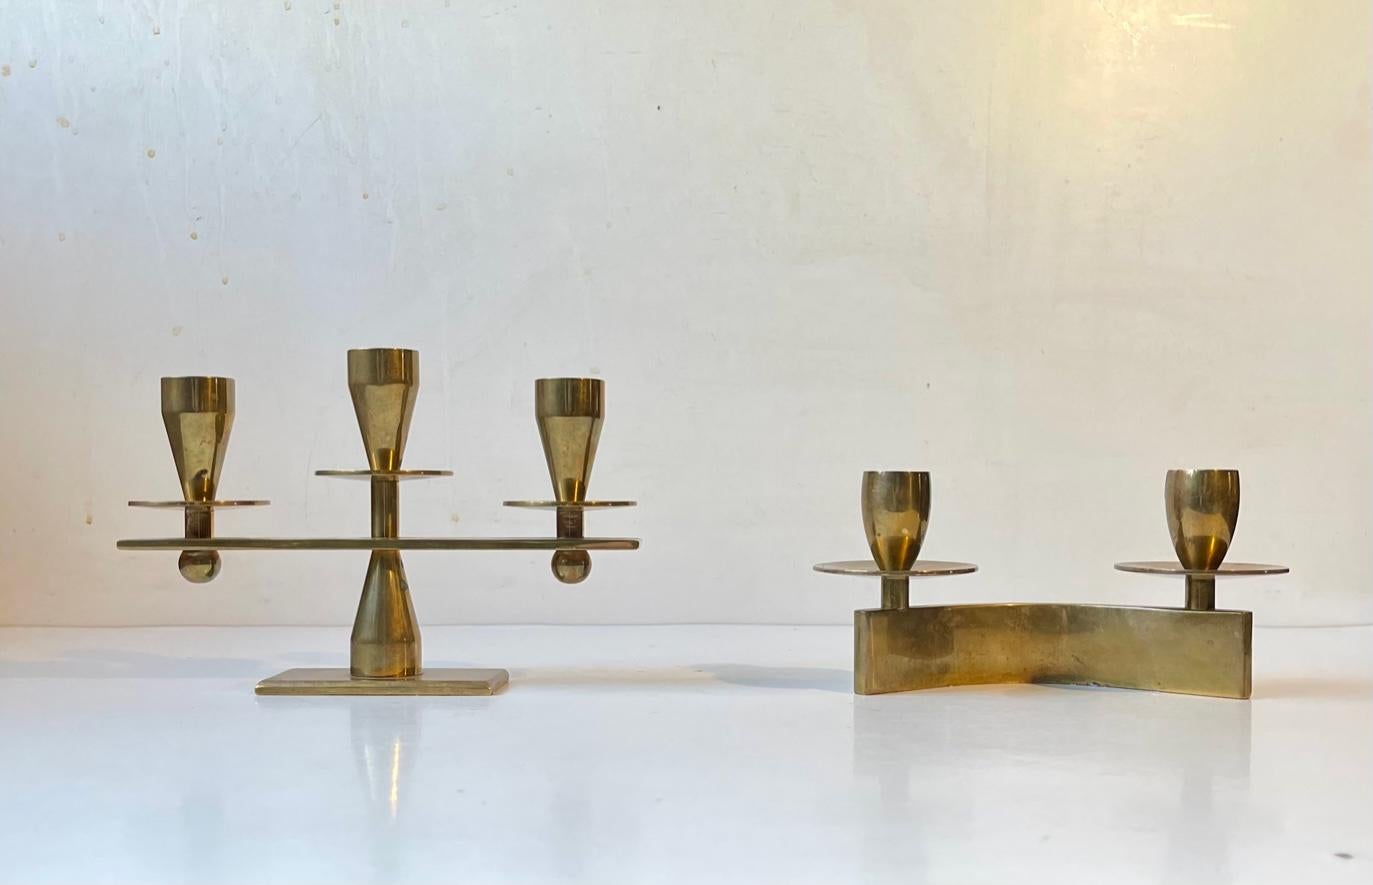 Two slightly different candleholders fashioned from solid bronze (heavy stock). One for two candles and one for 3. Both uses regular sized candles. Designed and made by Kara in Copenhagen Denmark during the early 1960s. Reminiscent in style to